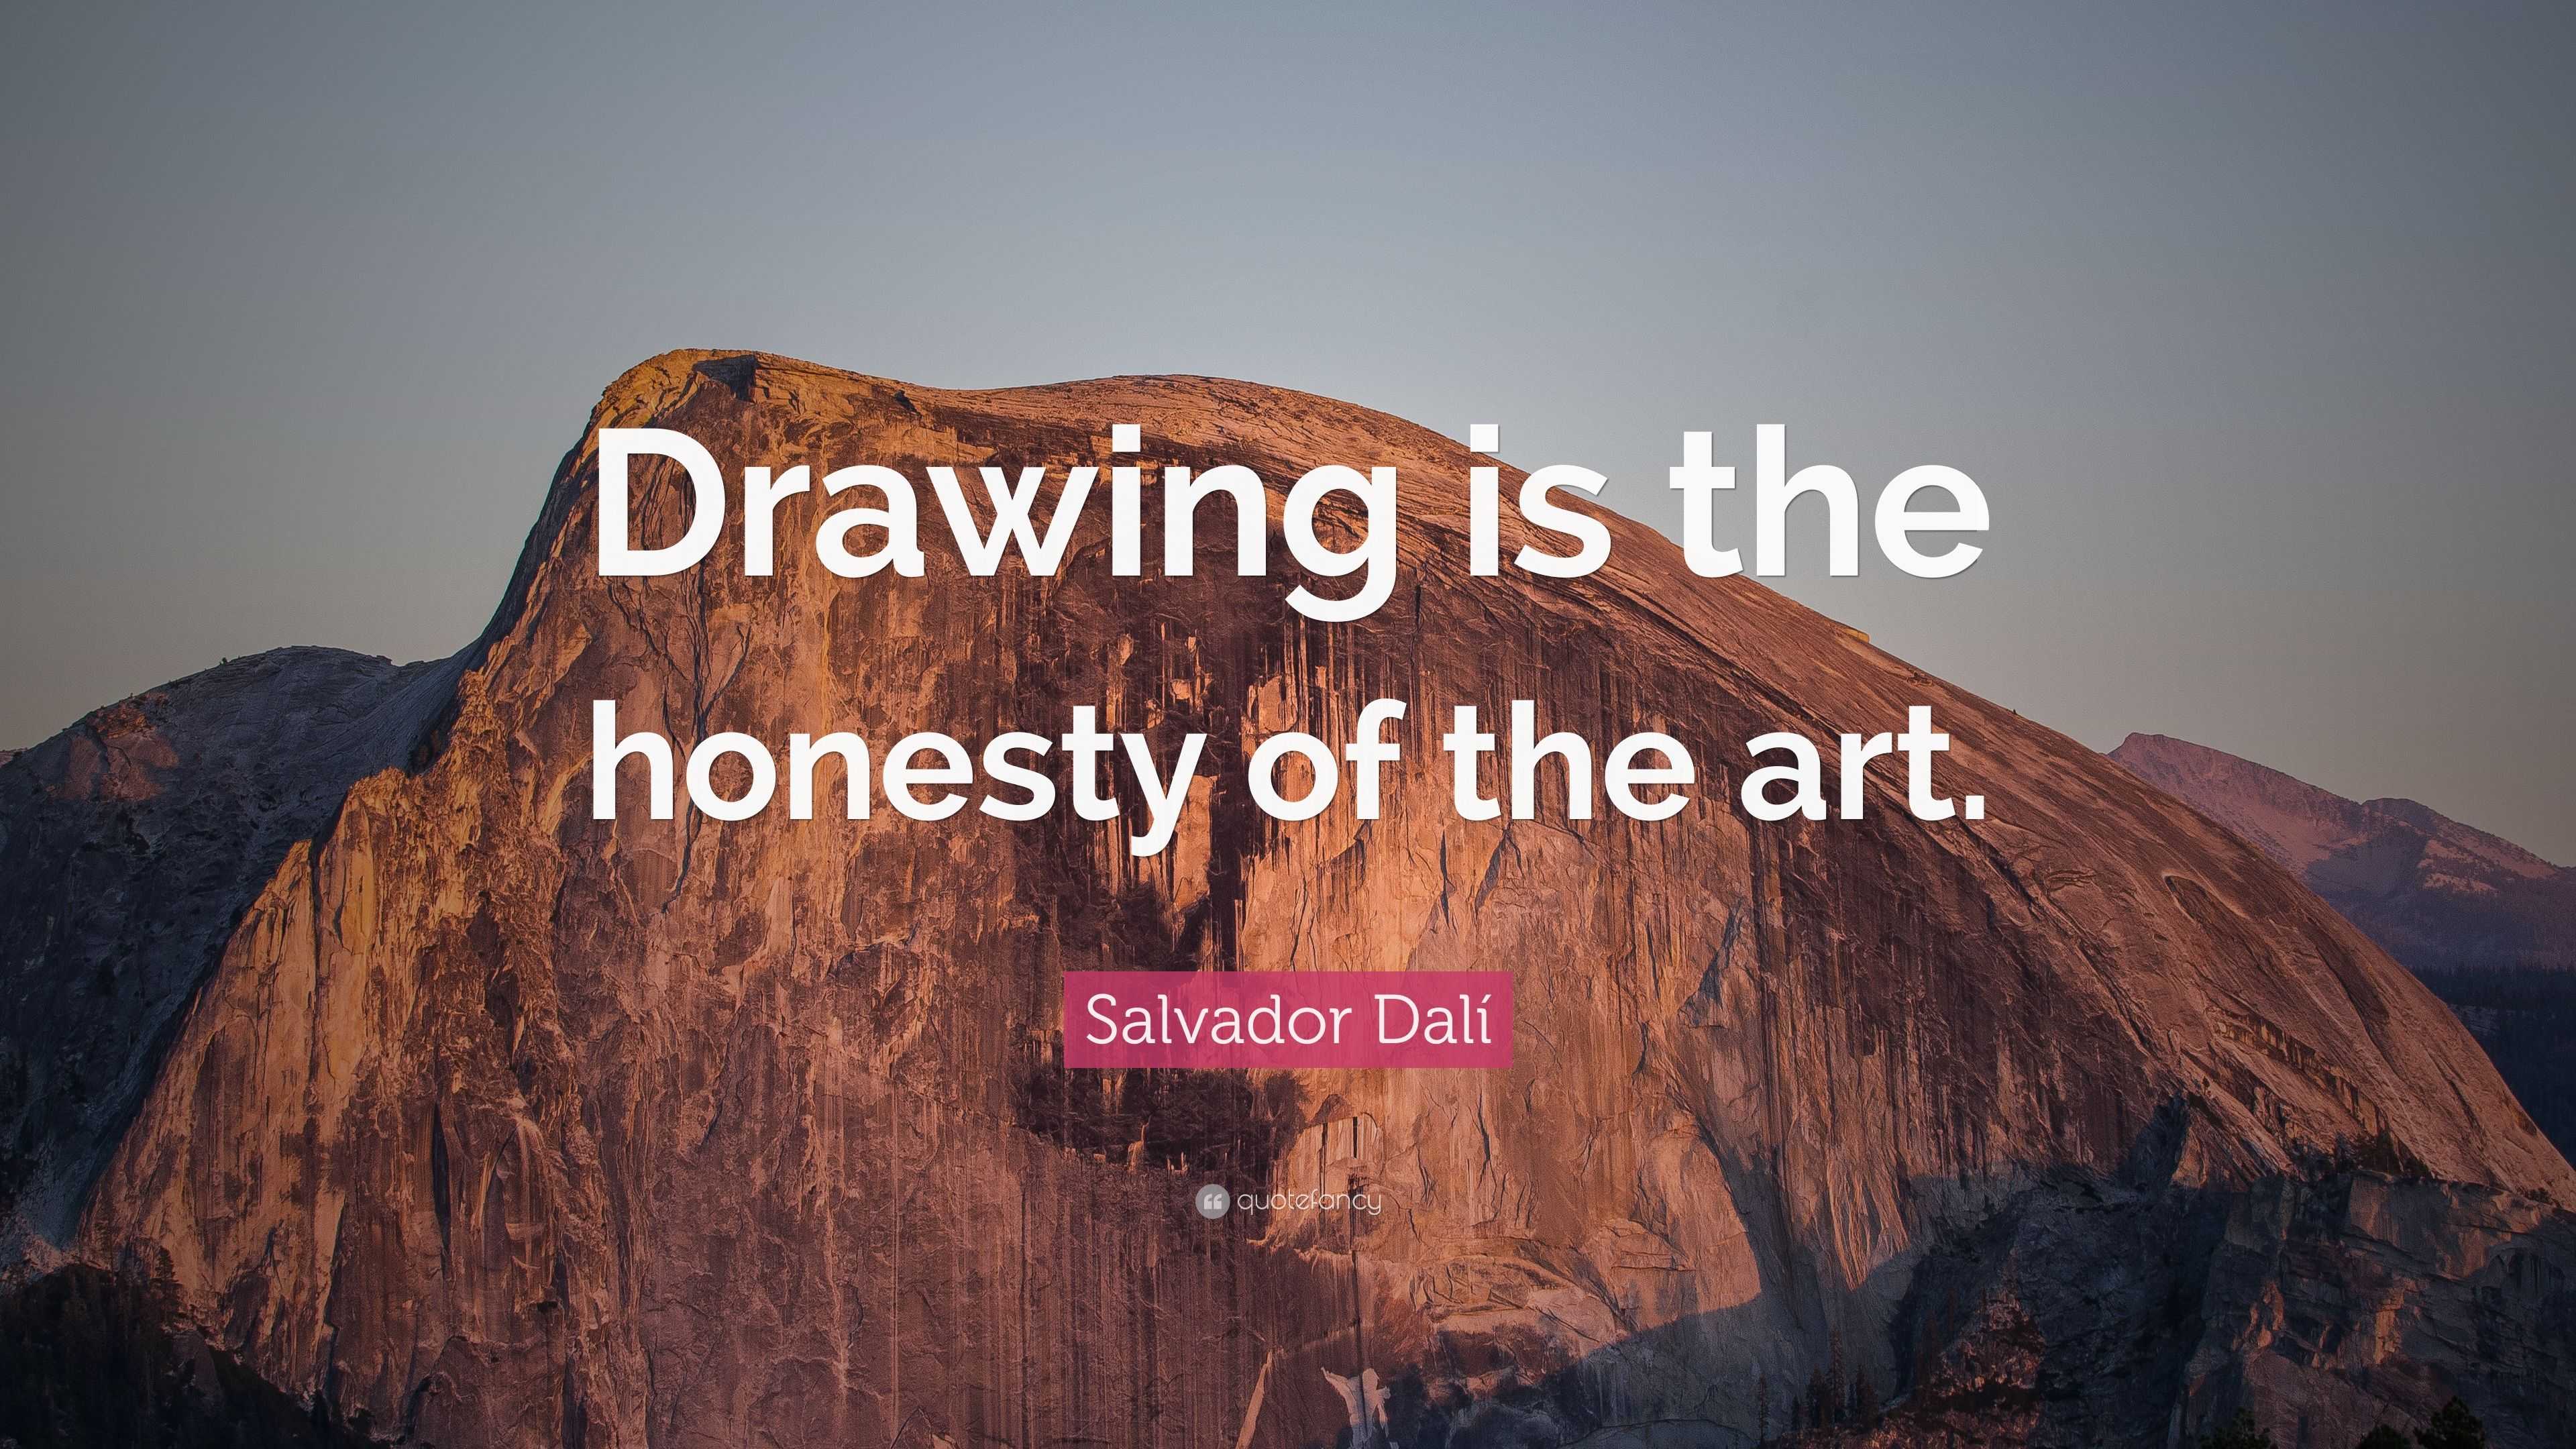 4828676 Salvador Dal Quote Drawing is the honesty of the art